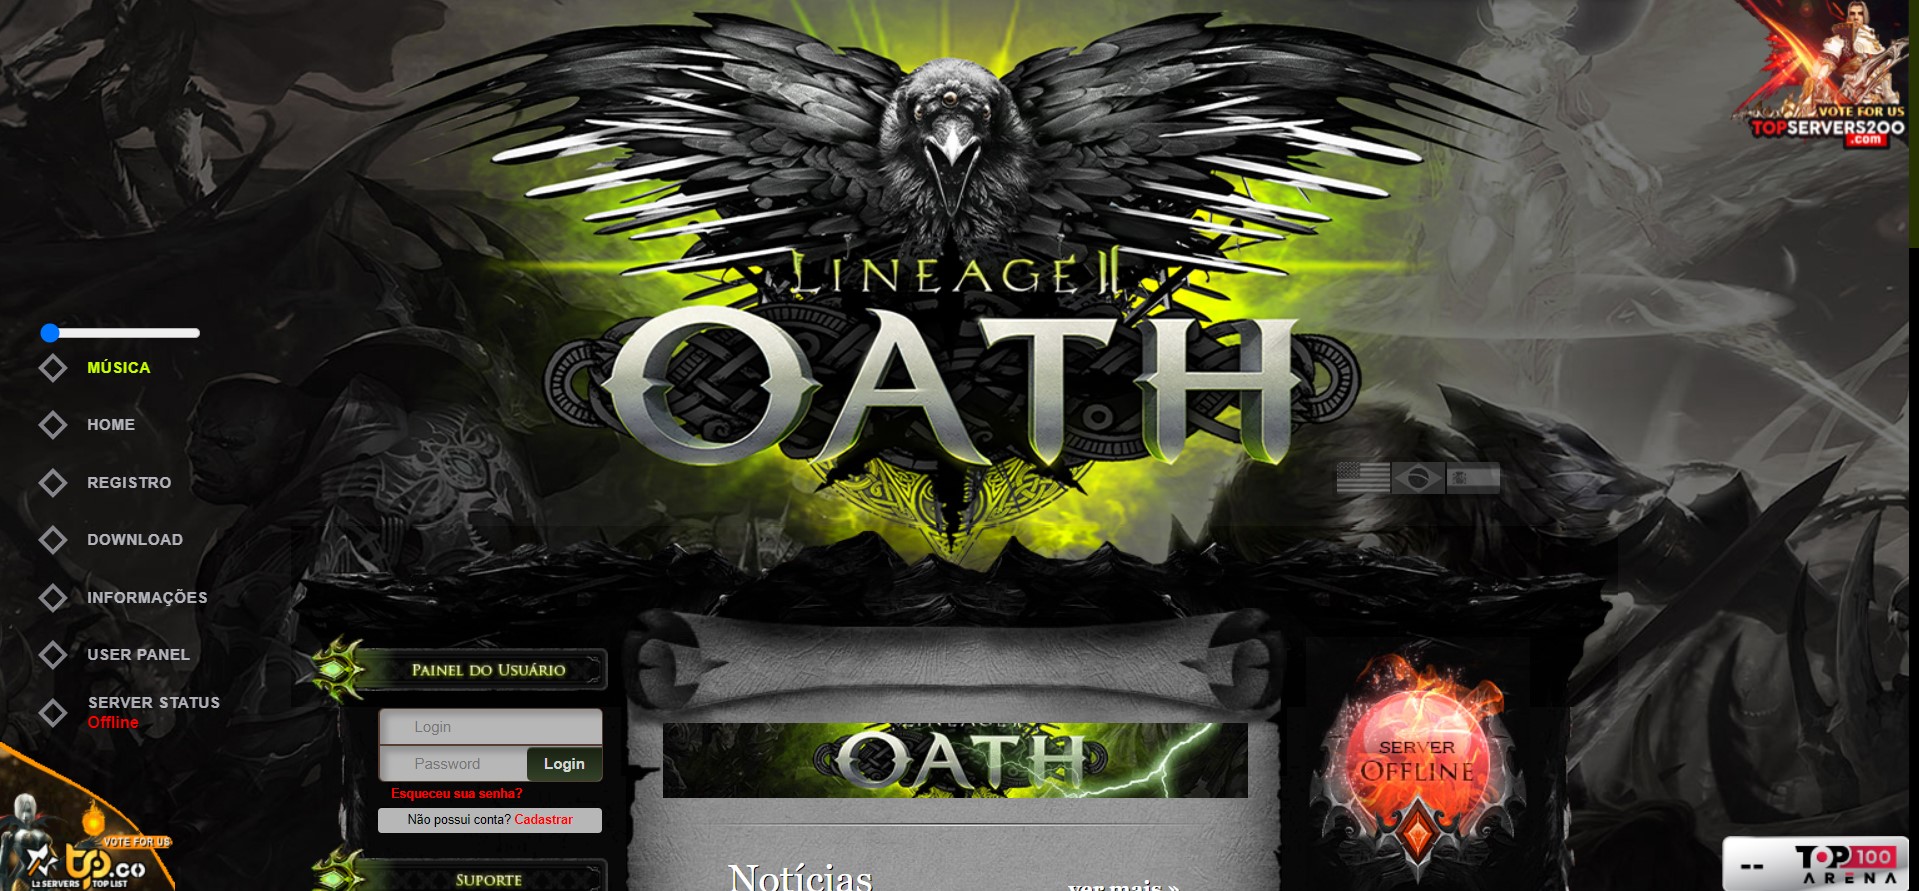 🛡️ L2Oath.com - Swear allegiance to C5 Chronicles with x500 Rates! Are you ready to accept the challenge?